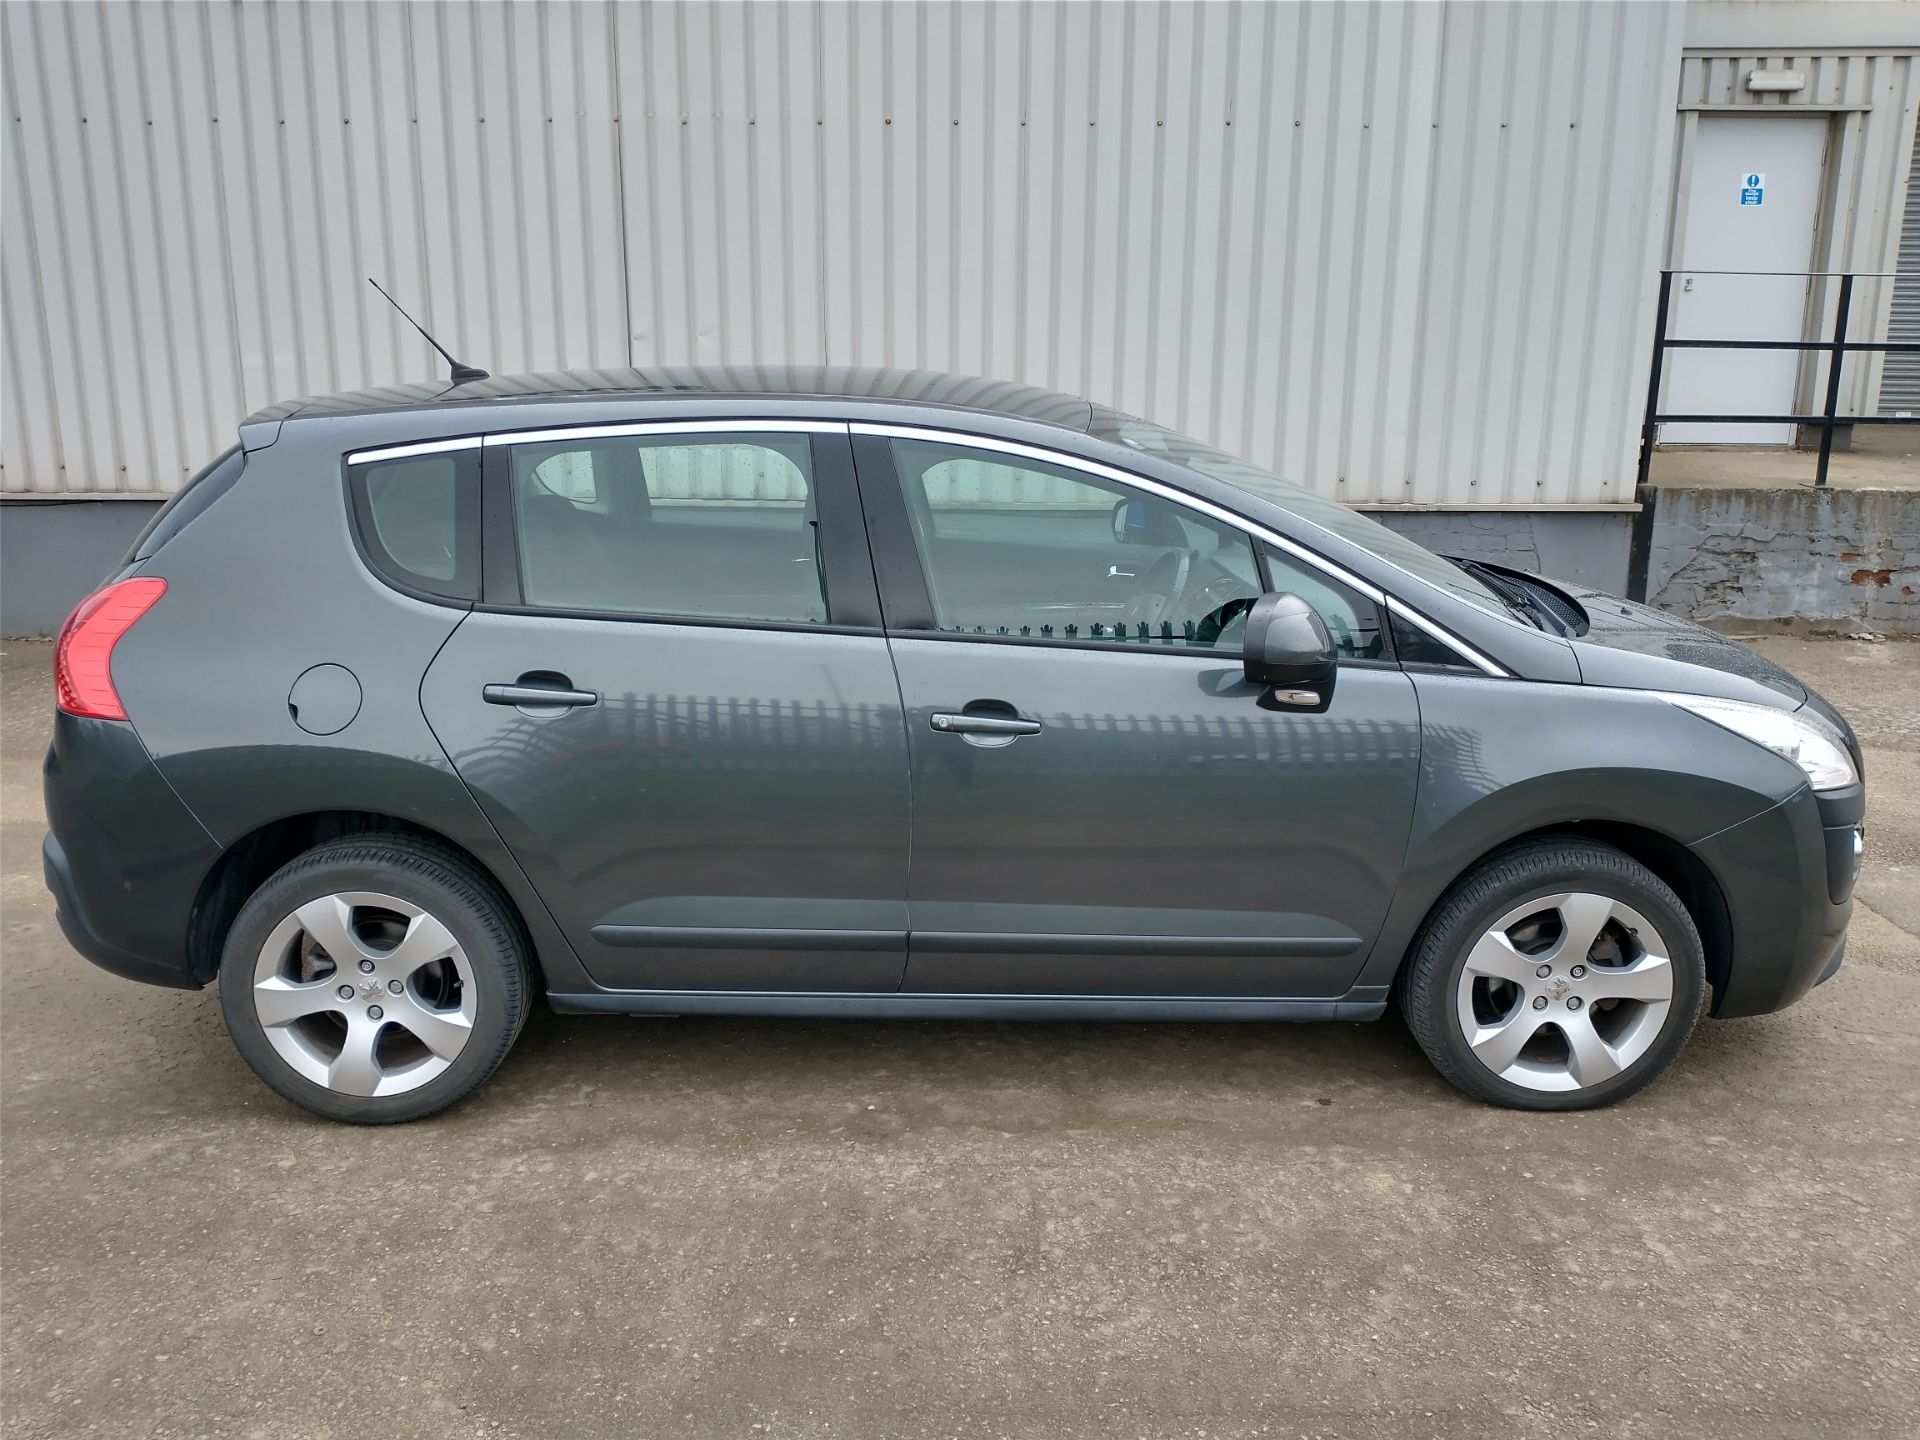 2012 Peugeot 3008 Active HDI 1.6 5DR SUV - CL505 - NO VAT ON THE HAMM - Image 9 of 19